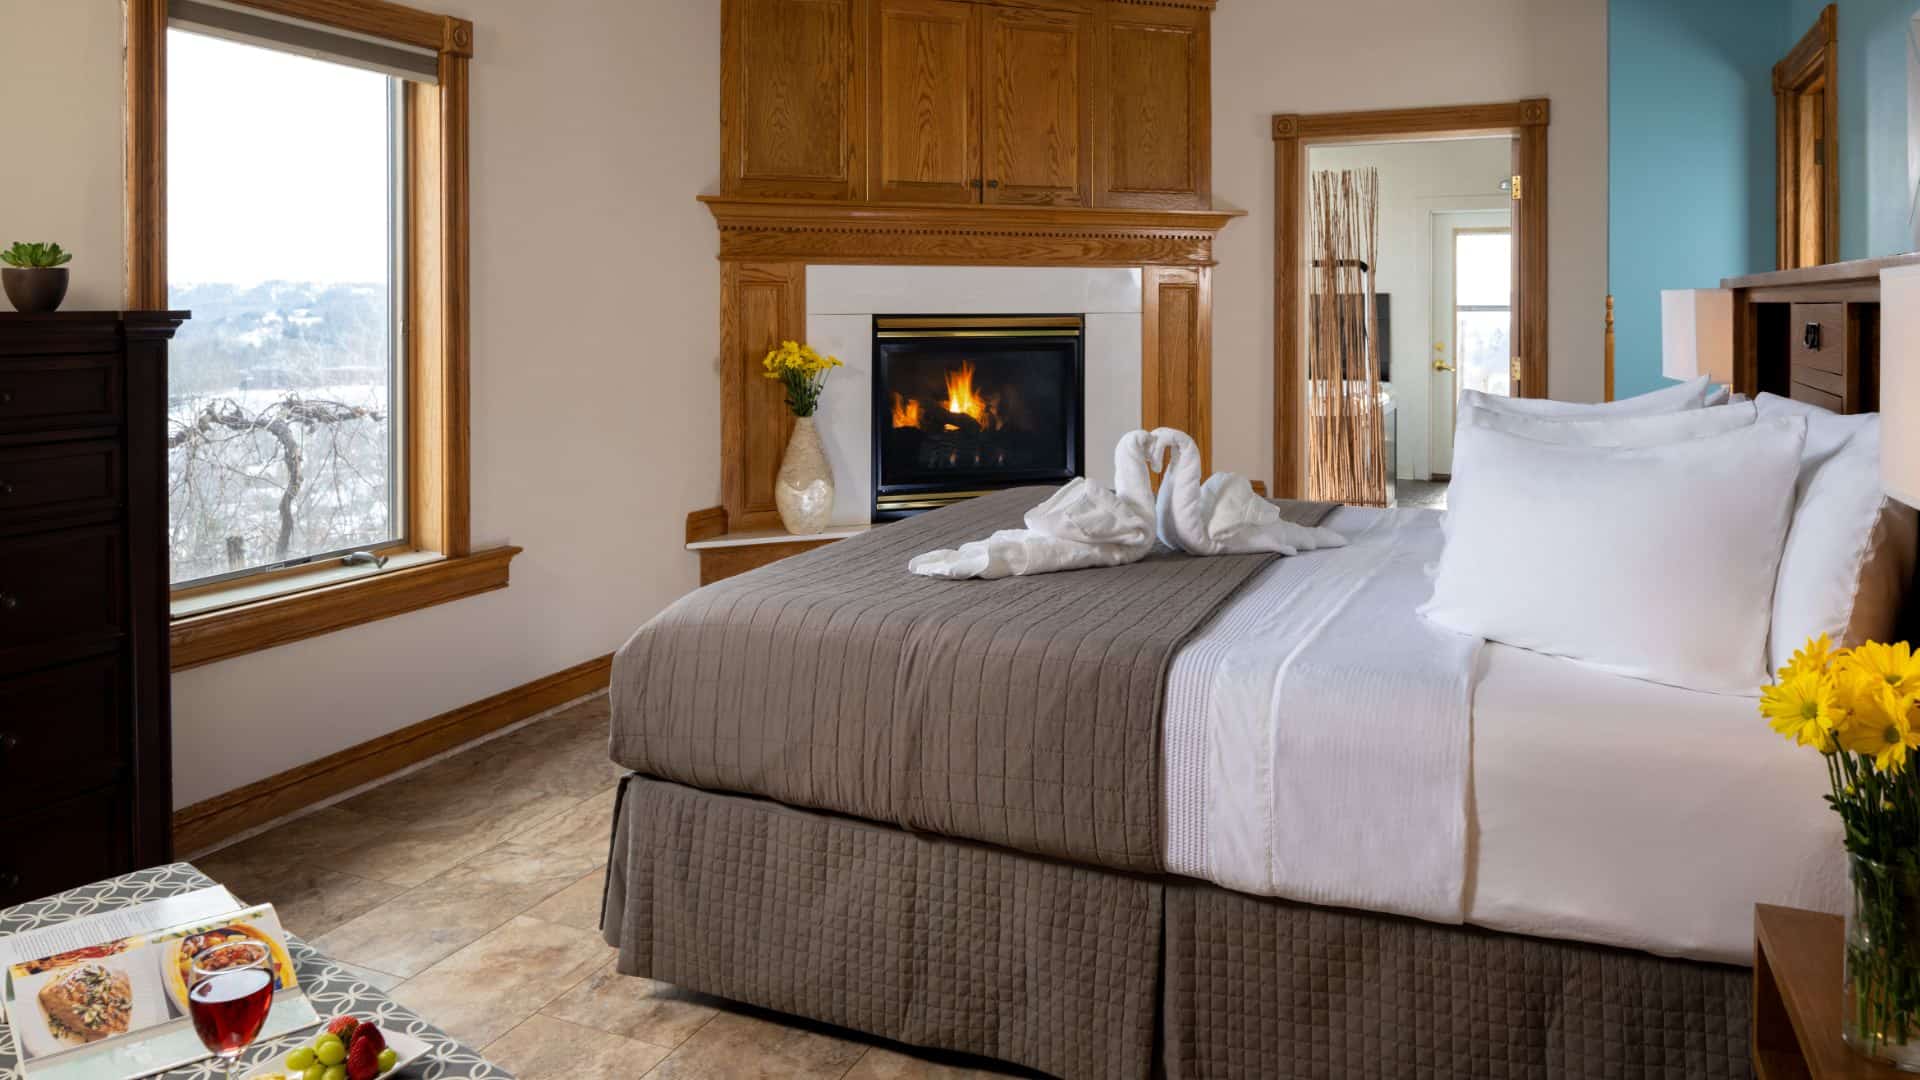 Large bedroom suite with cream and turquoise walls, tiled flooring, white bedding, gray comforter, large fireplace, and view into bathroom